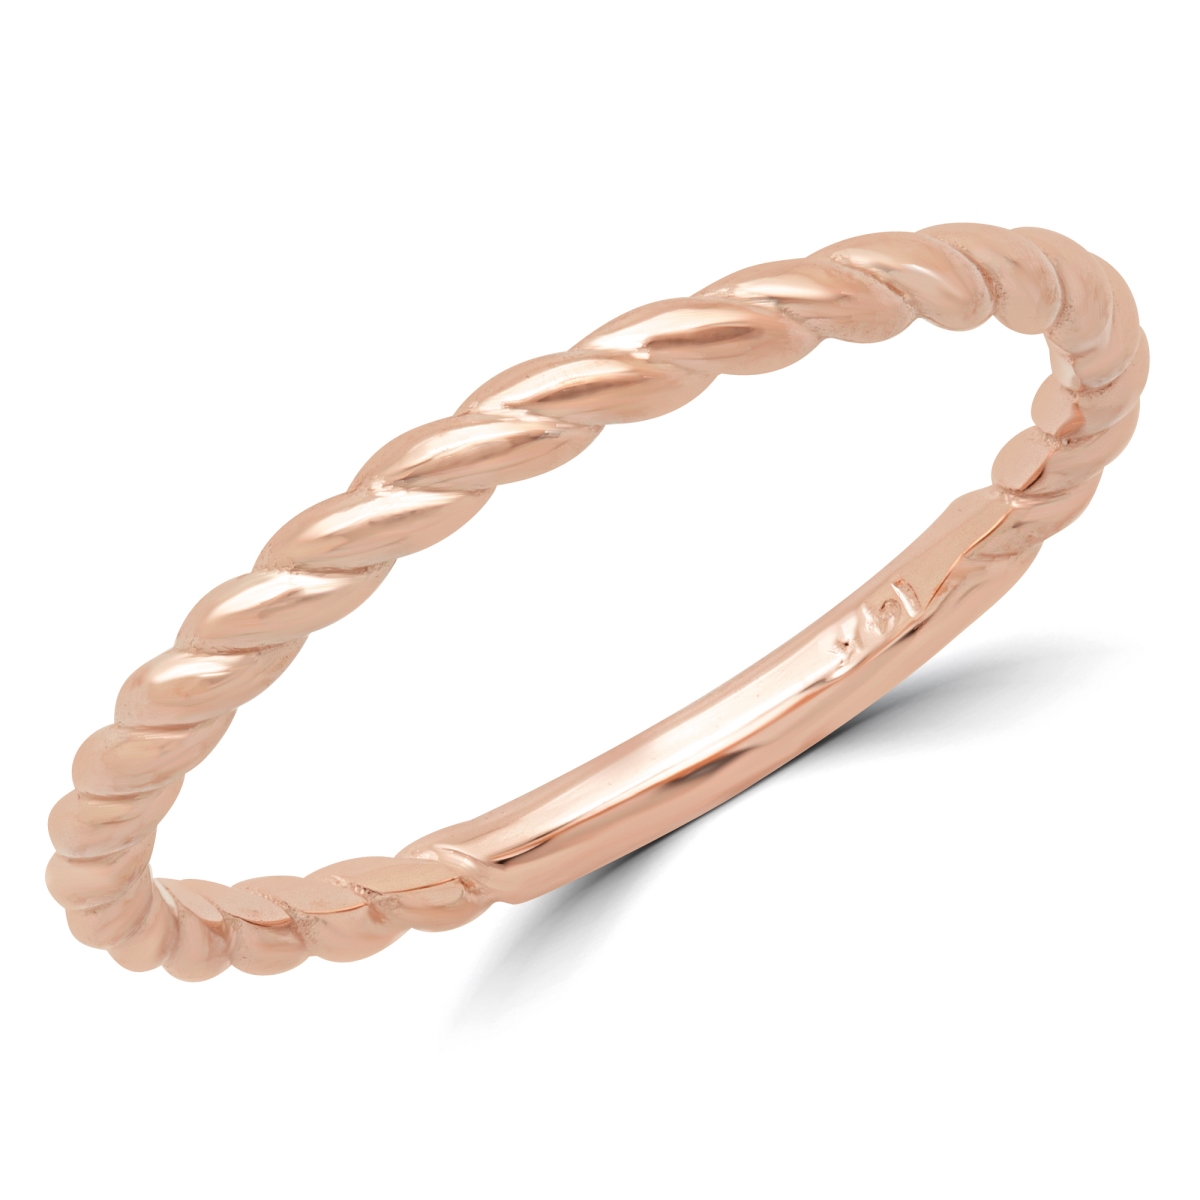 Picture of Majesty Diamonds MD180603-6 Braided Rope Classic Wedding Band Ring in 14K Rose Gold - Size 6